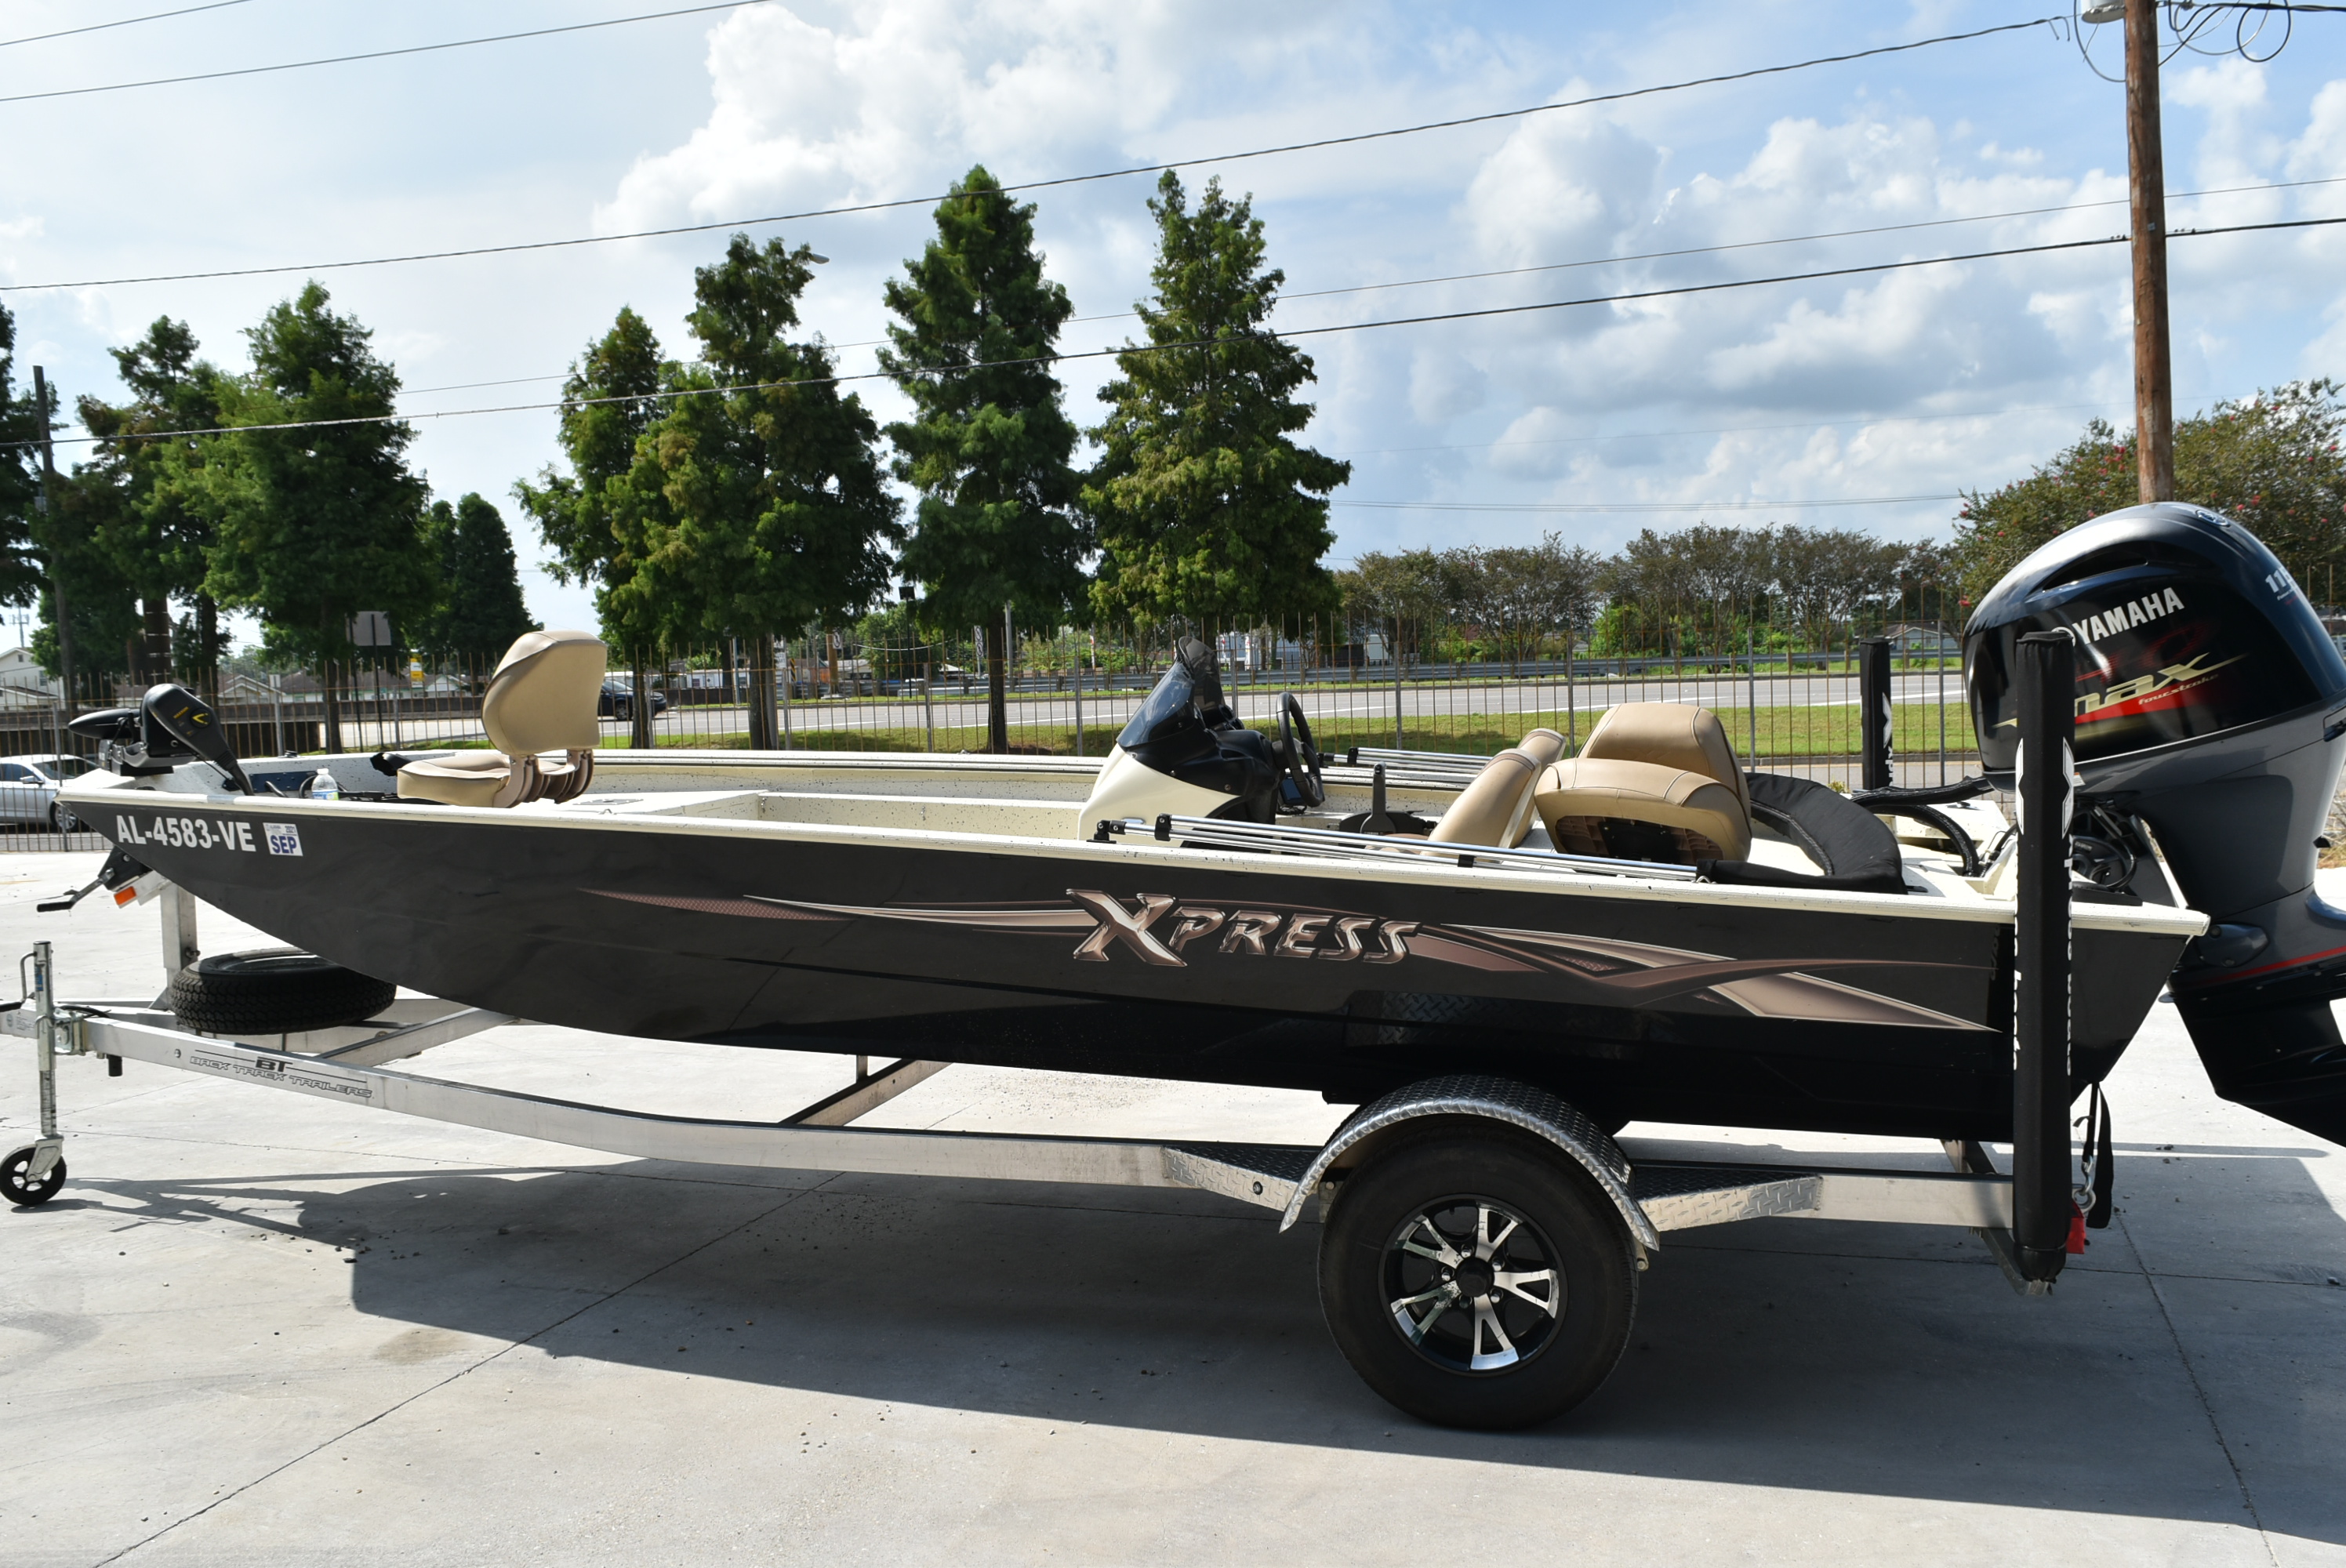 2020 Xpress boat for sale, model of the boat is 200Xp & Image # 5 of 8